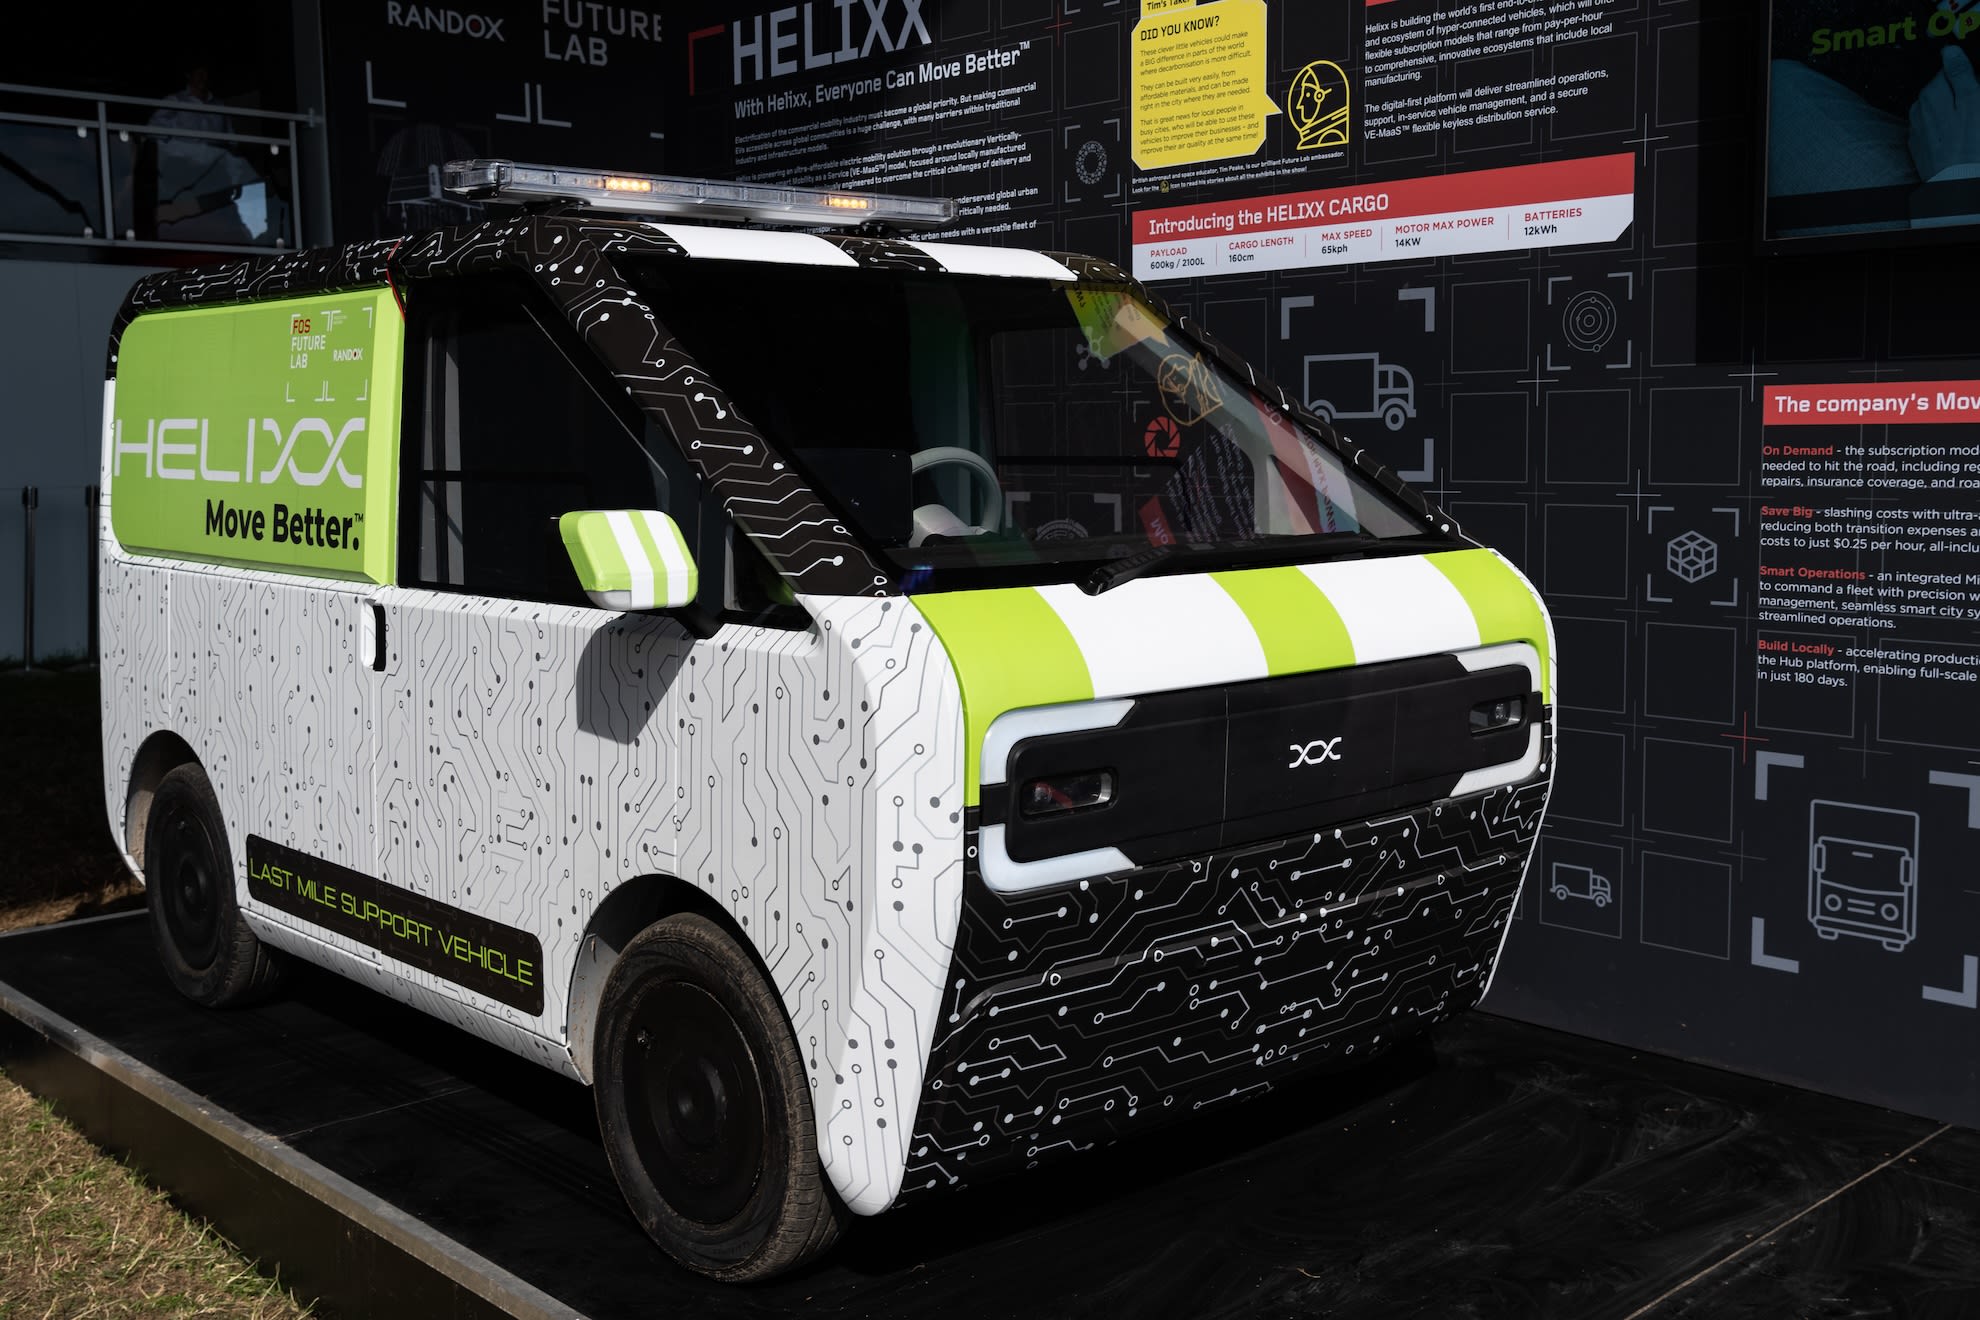 Helixx wants to bring fast-food economics and Netflix pricing to EVs